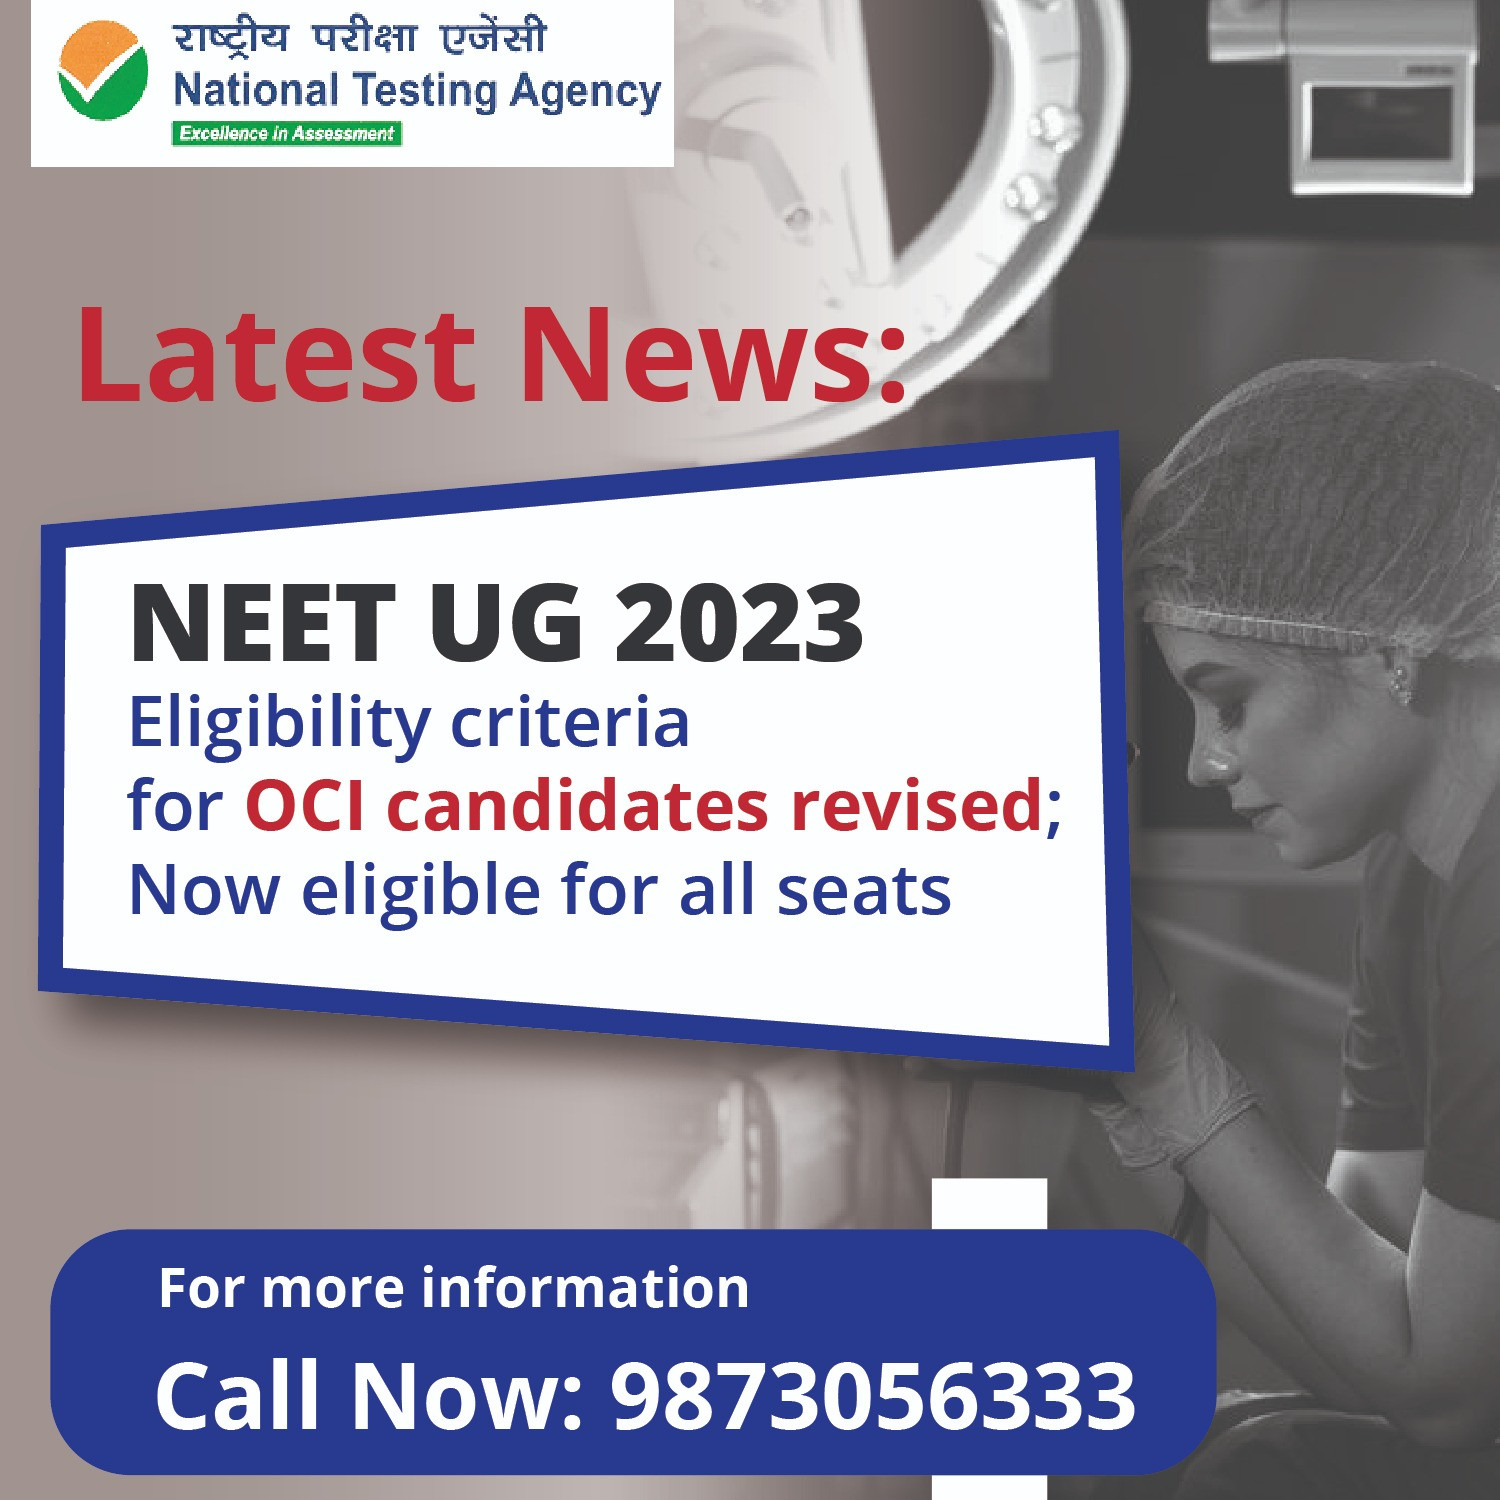 NEET UG 2023 Eligibility criteria for OCI candidates revised; now eligible for all seats